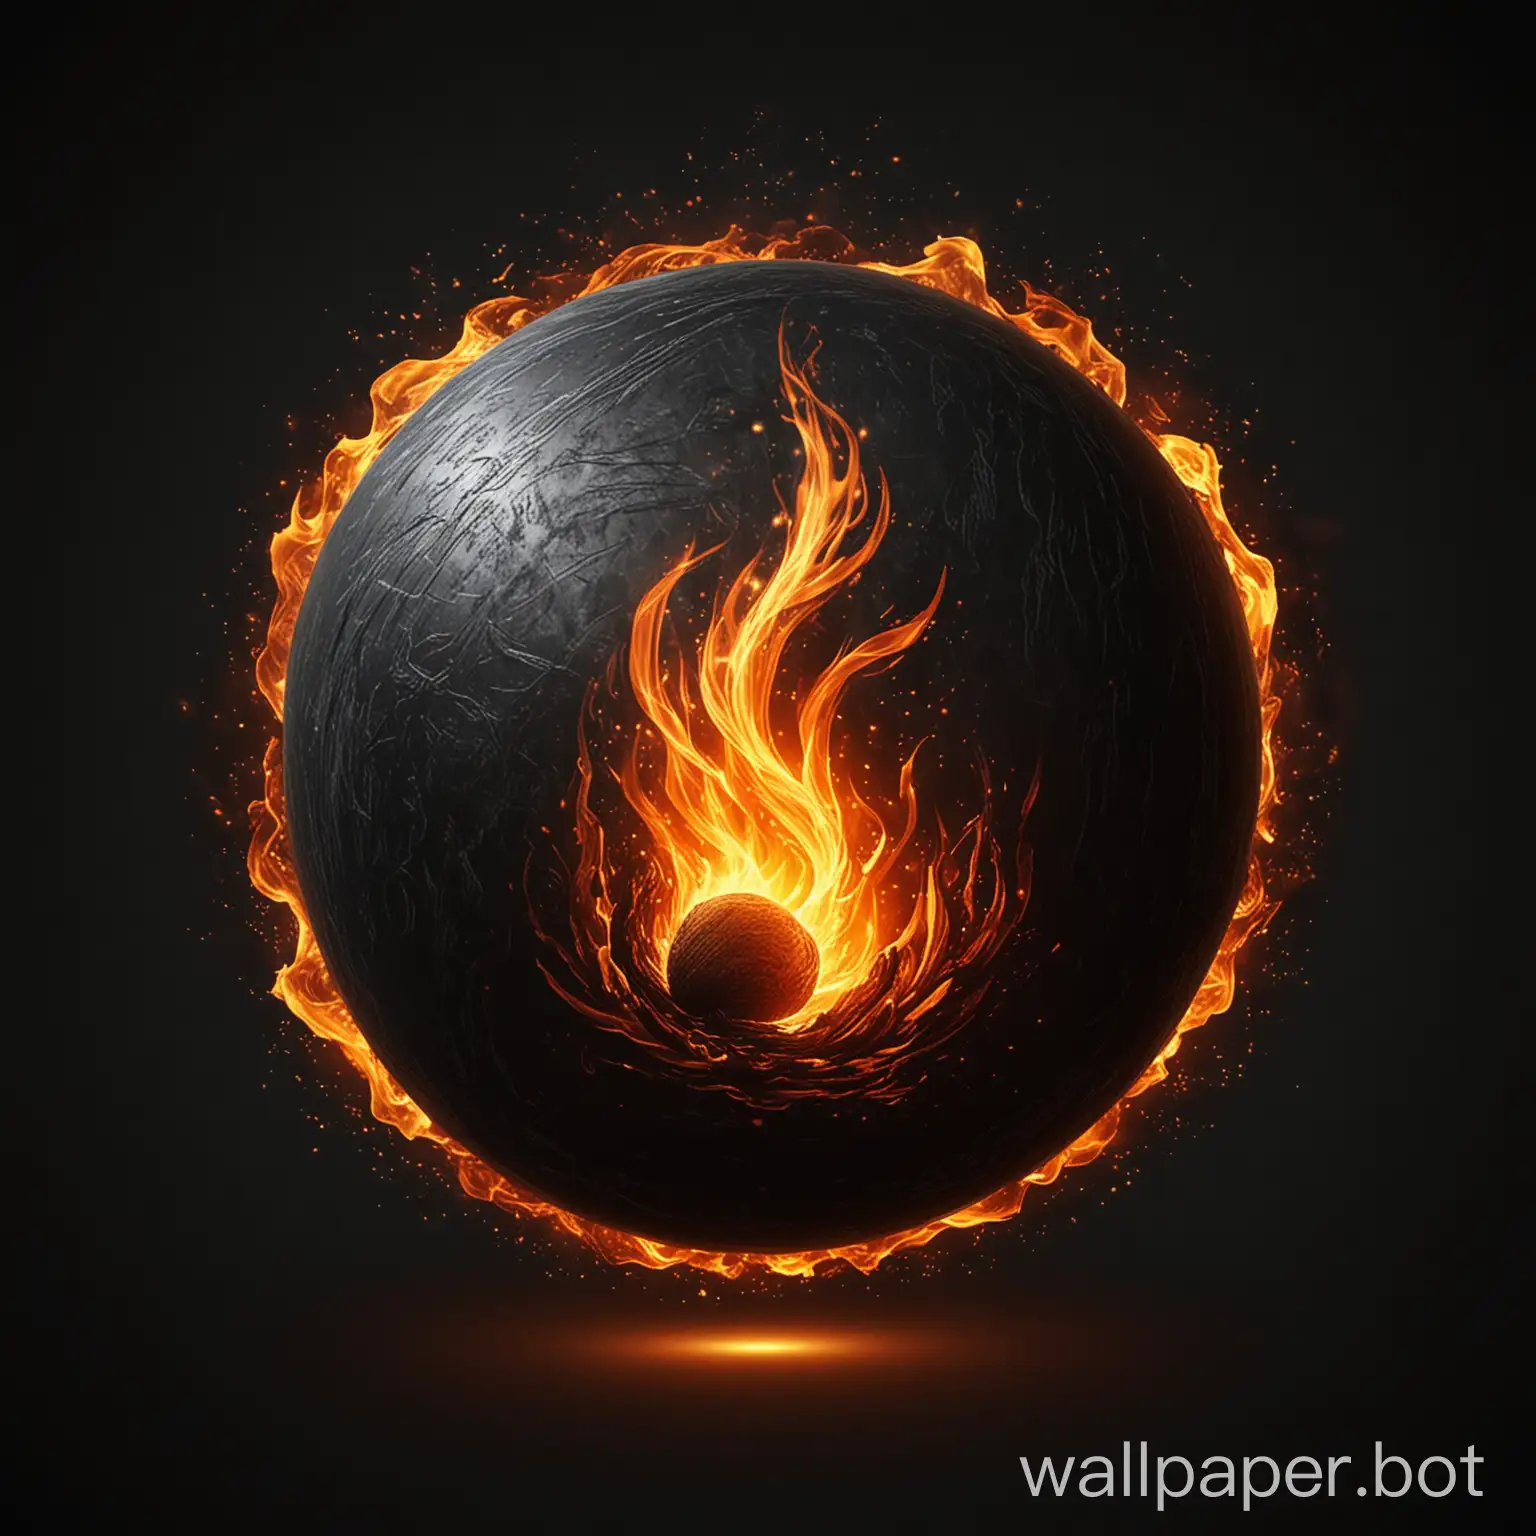 draw a sphere filled with fire on a black background